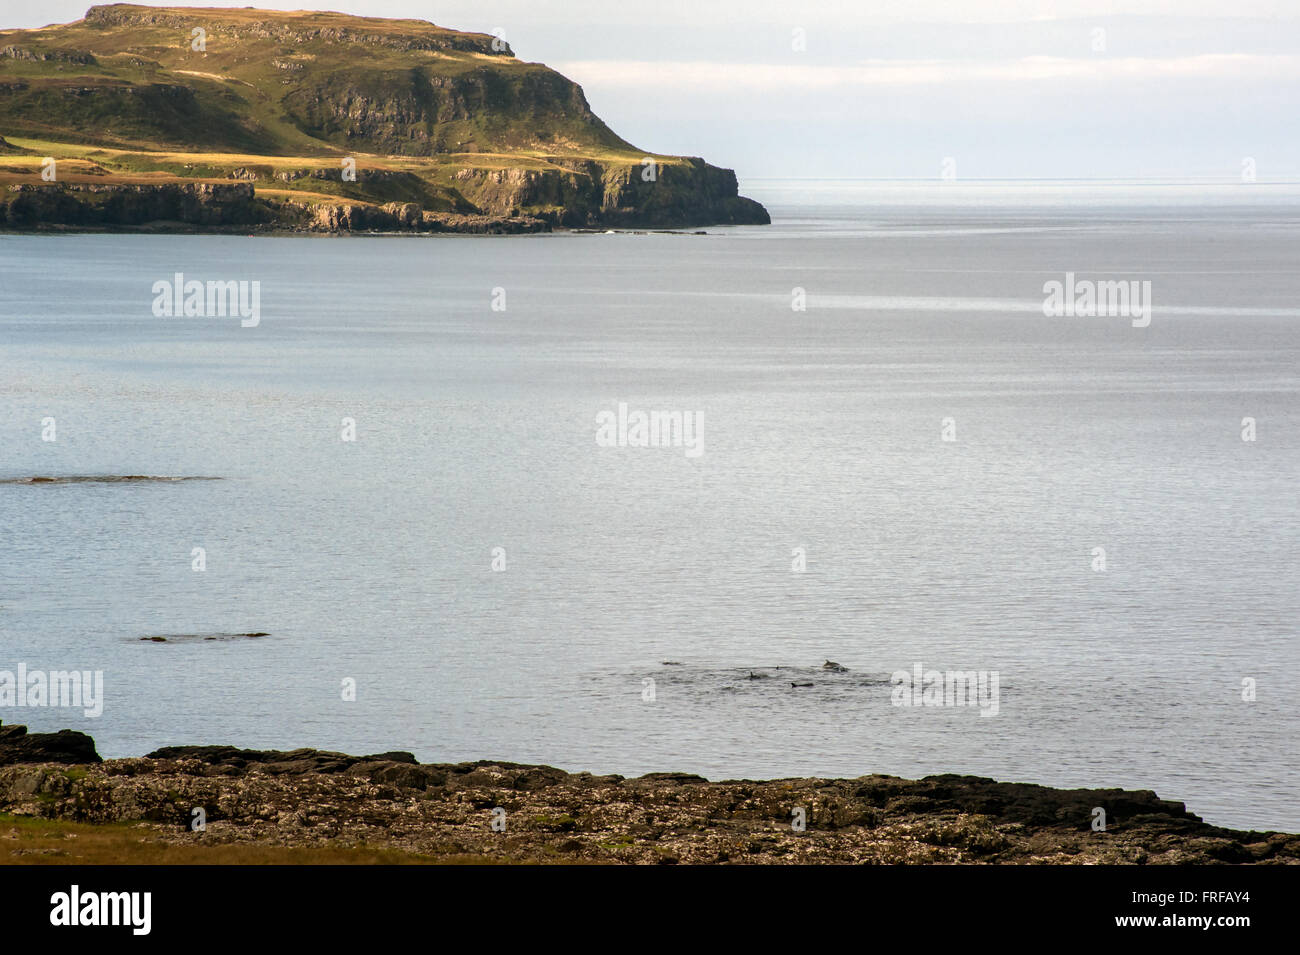 A school of Common Dolphin in Calgary Bay The isle of Mull Stock Photo